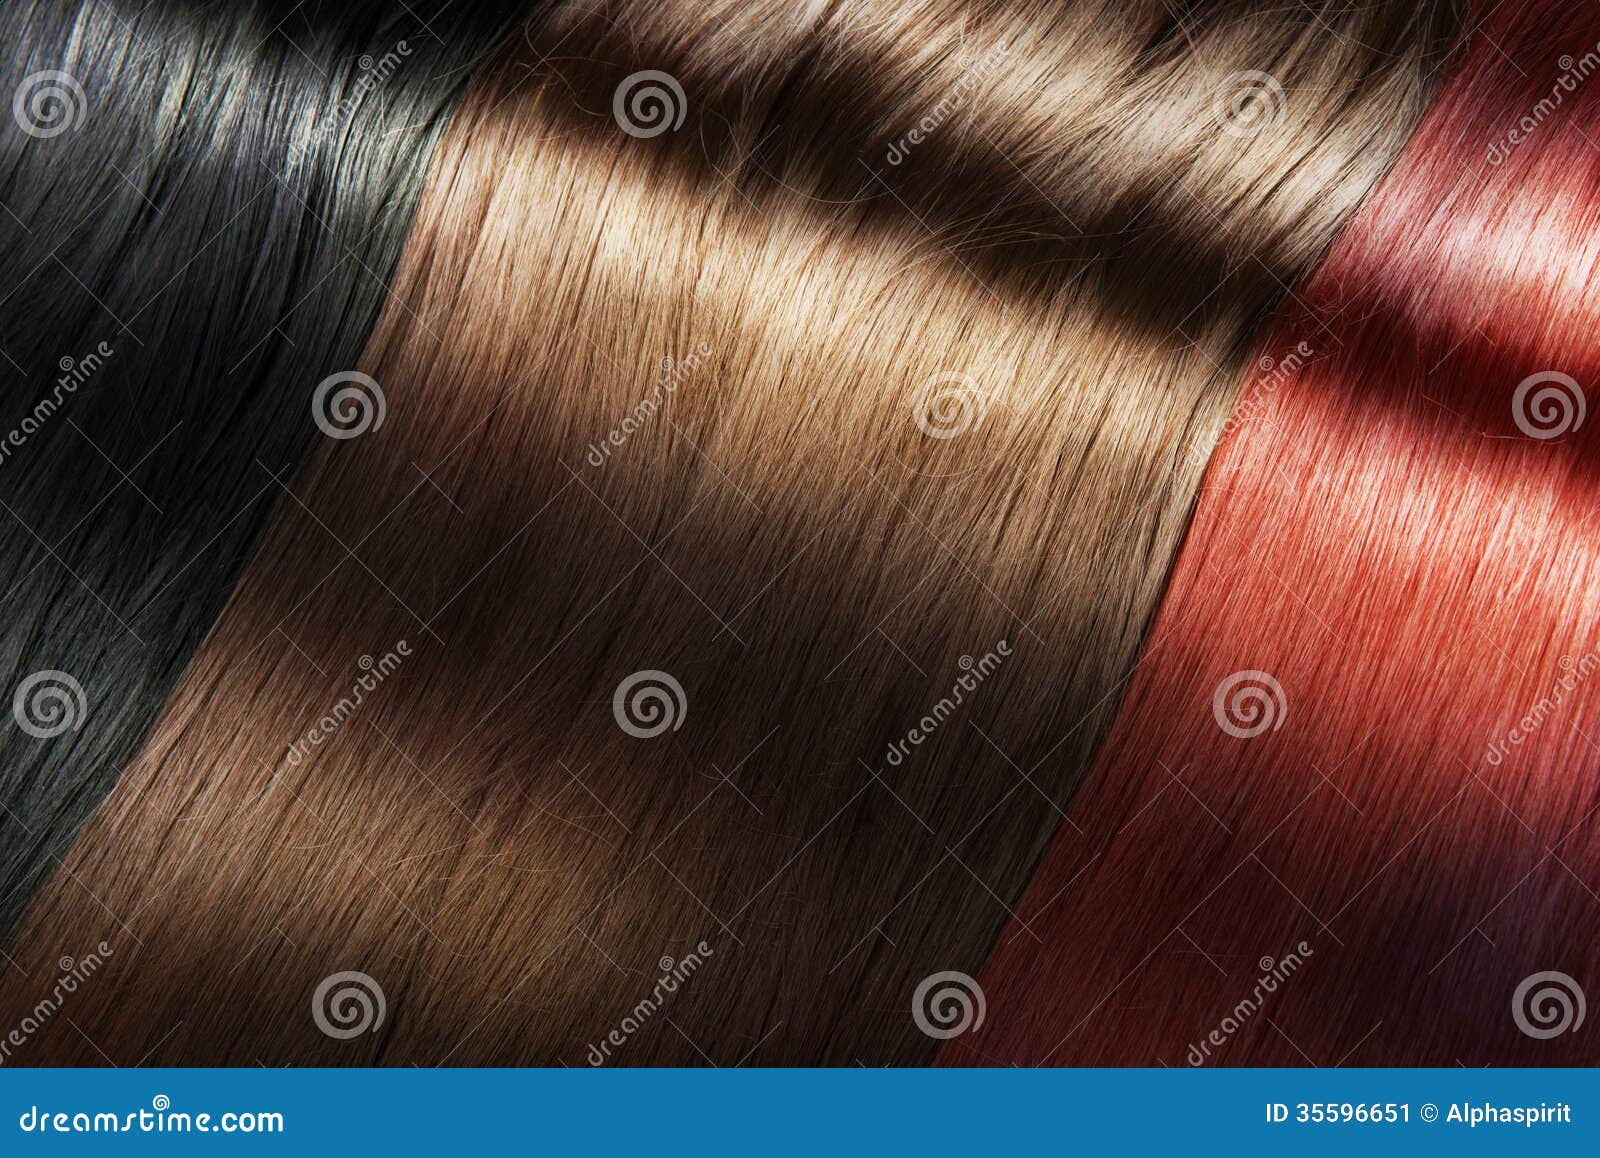 Shiny Hair Color Stock Image - Image: 35596651